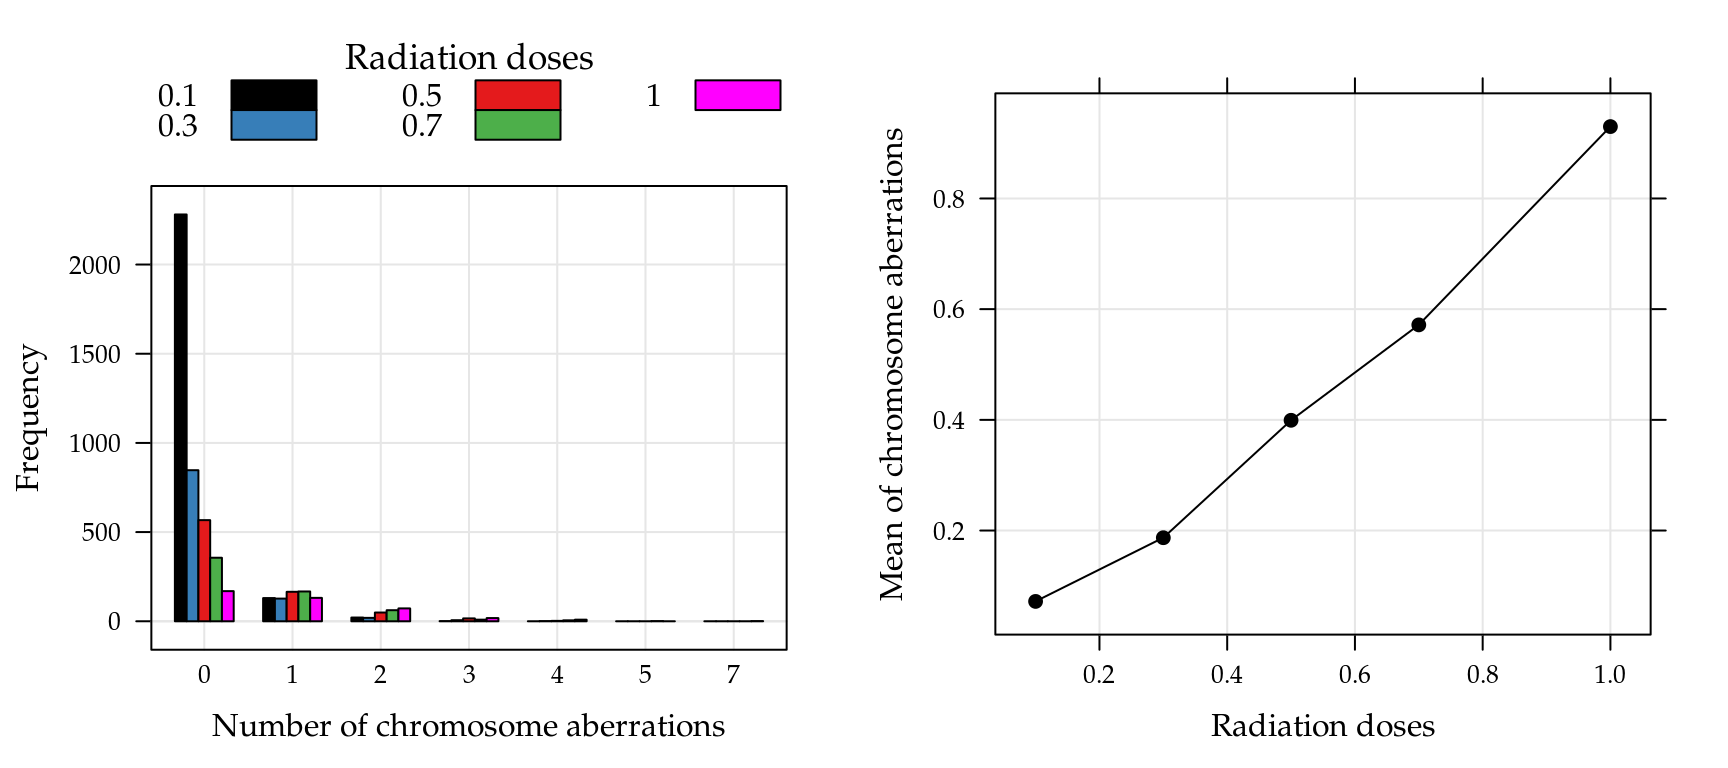 Observed frequencies of the chromosome aberrations counts by radiation doses (left) and means of chromosome aberrations for each radiation doses (right).